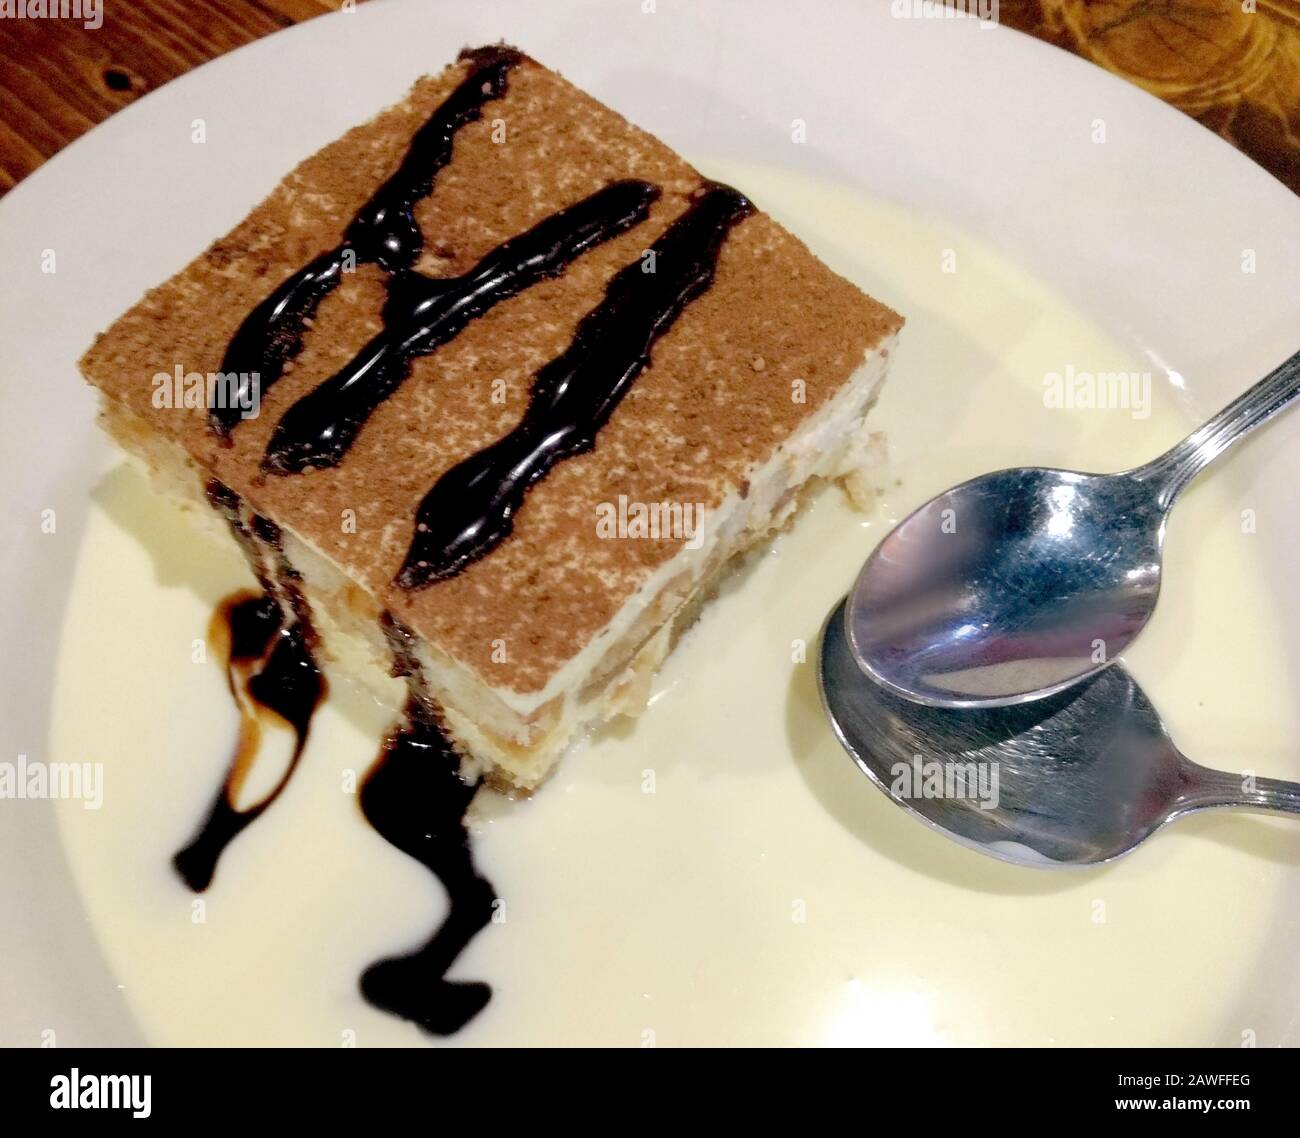 Delicious slice of tiramisu on a vanilla cream sauce, drizzled with chocolate and served with two spoons for sharing Stock Photo